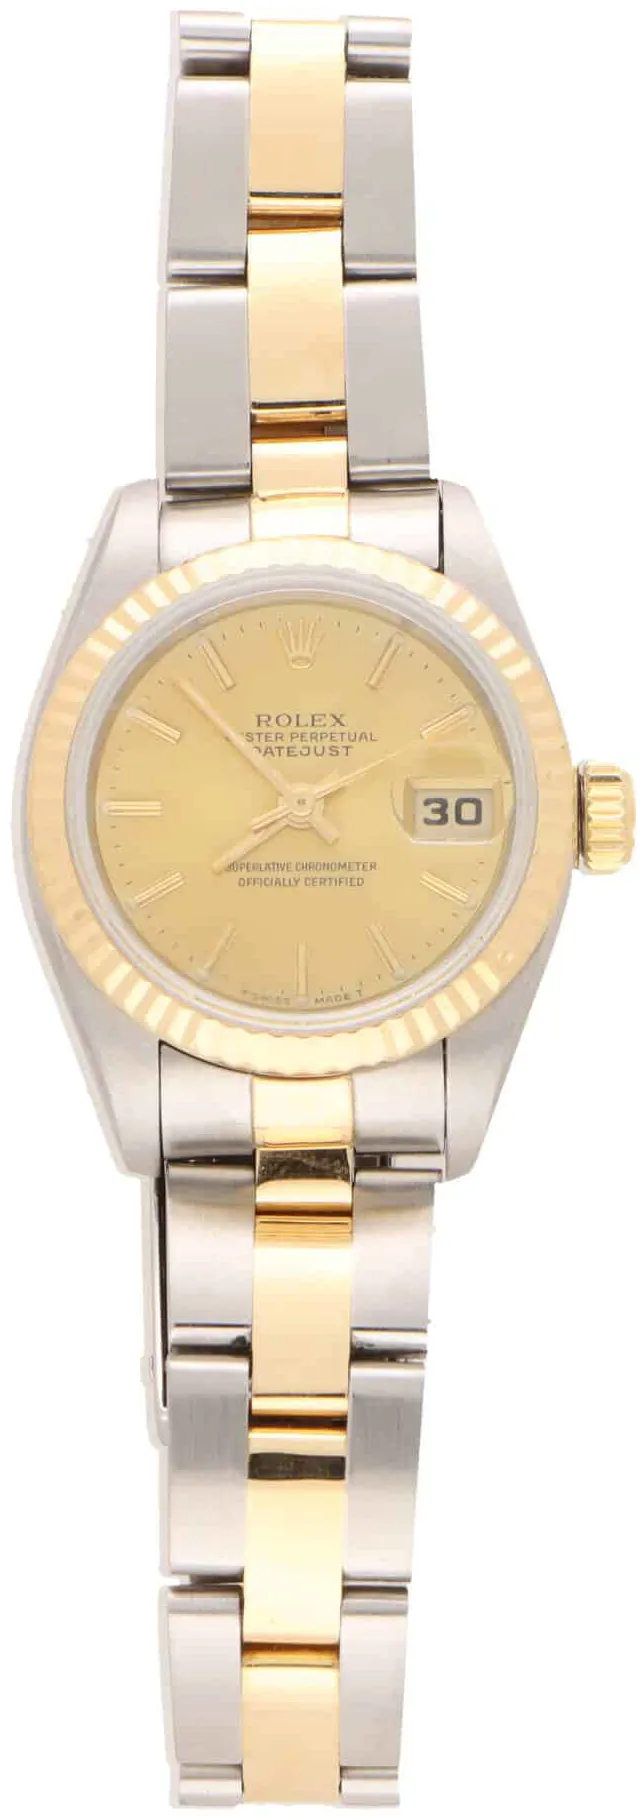 Rolex Oyster Perpetual "Datejust" 69173 26mm Yellow gold and stainless steel Gold